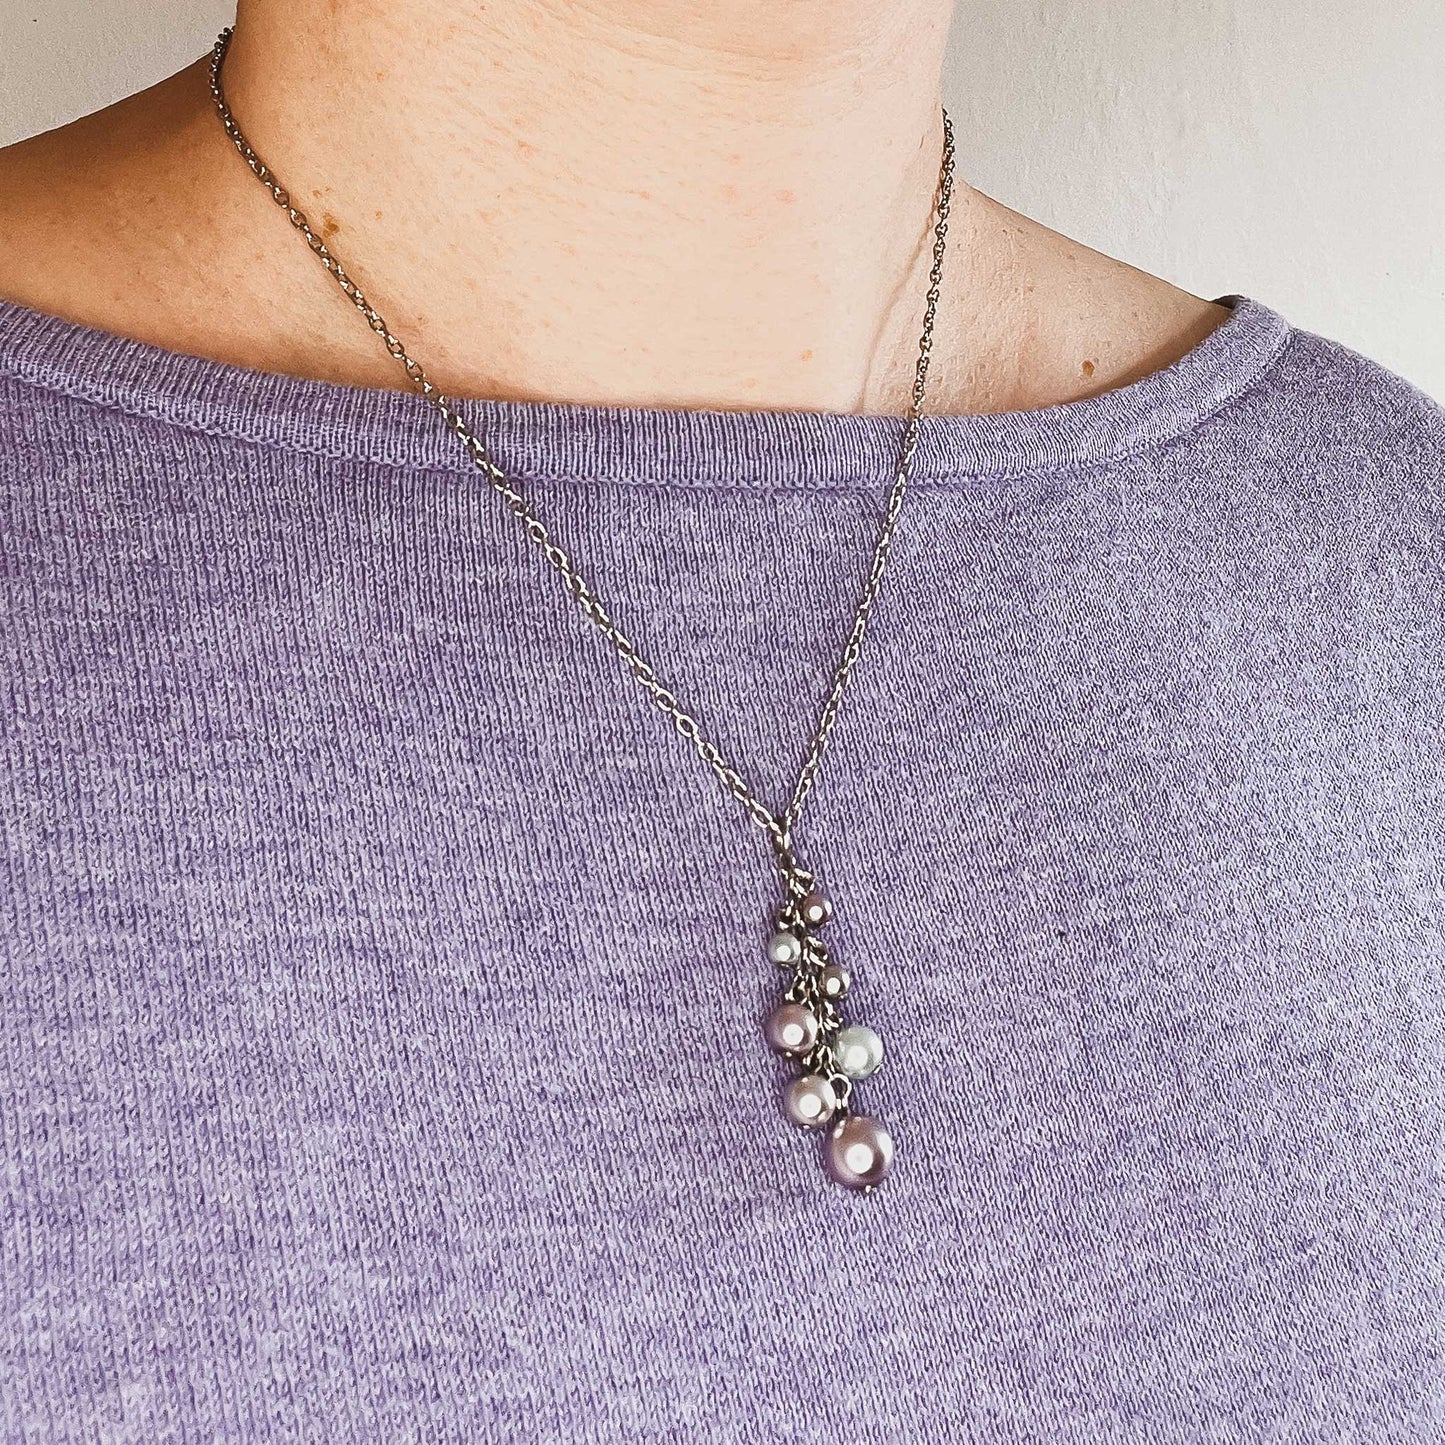 Woman wearing purple jumper and faux pearl cluster necklace